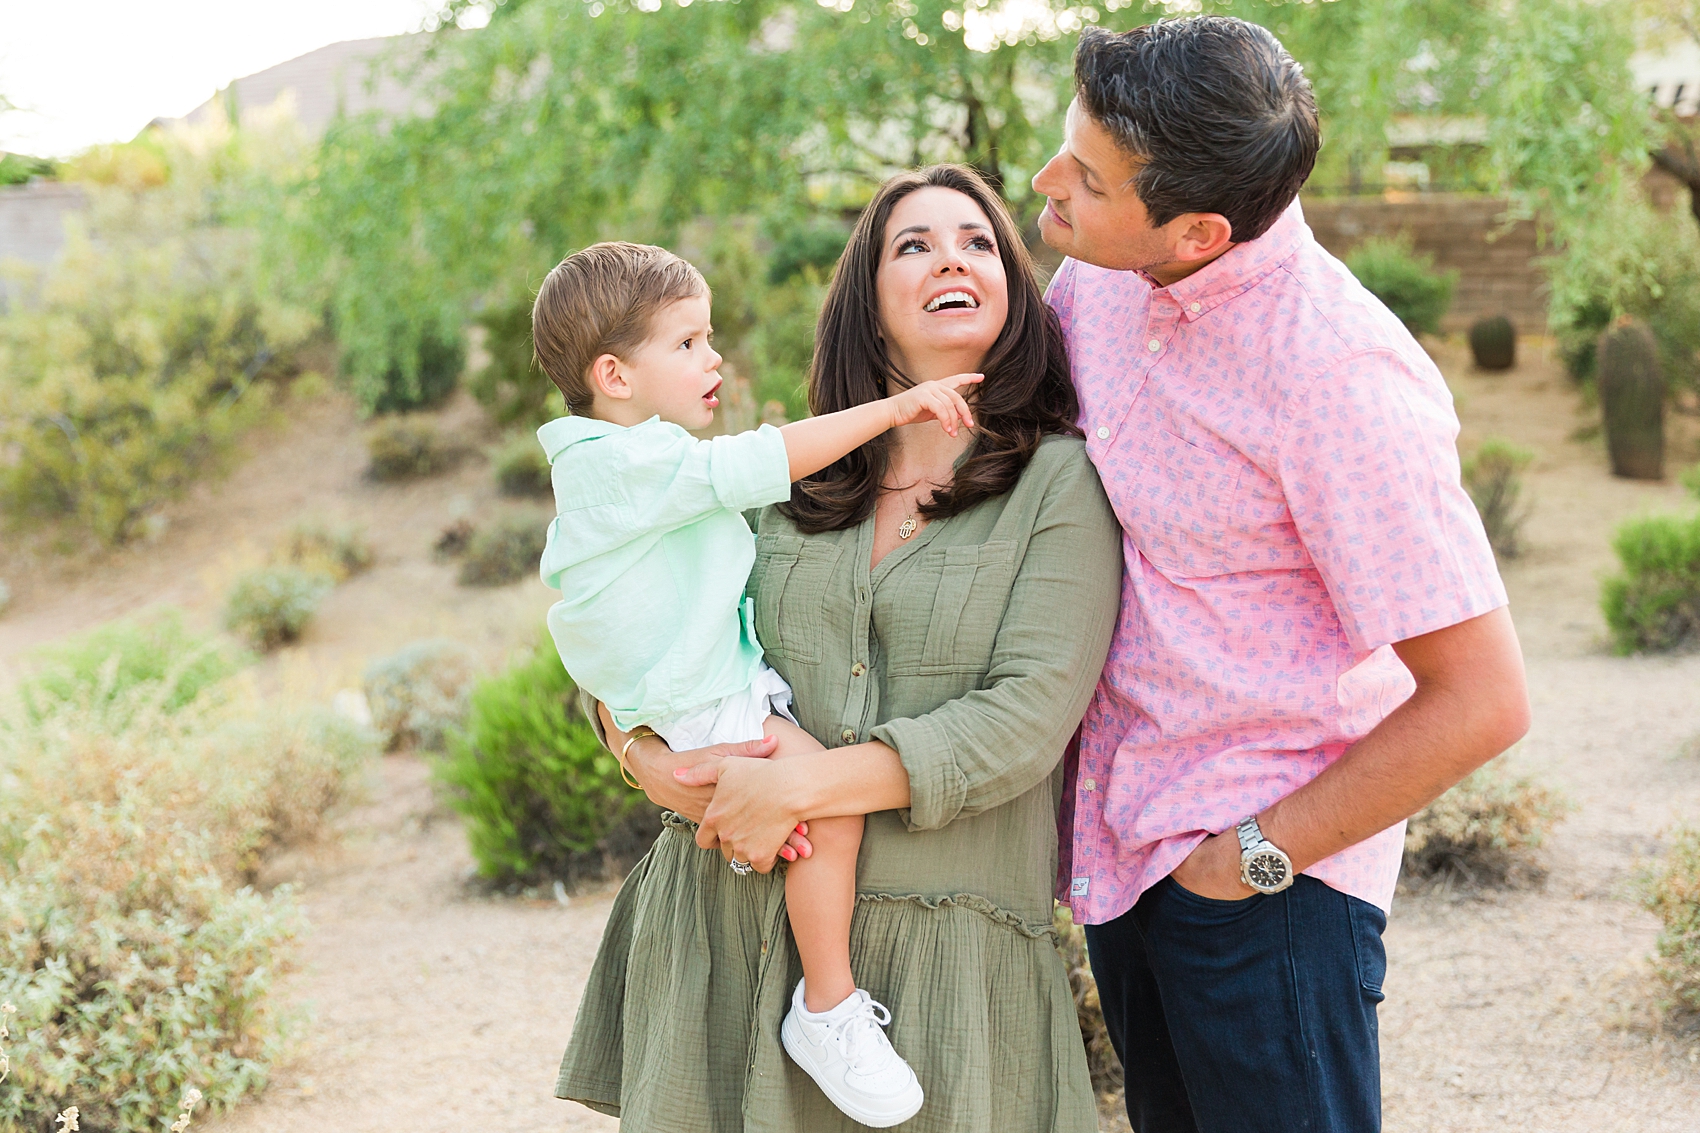 Leah Hope Photography | Scottsdale Phoenix Arizona | Home Backyard Family Photos | Family Pictures | What to Wear | Family Poses | Family of Three | Gender Reveal | Baby Gender Announcement